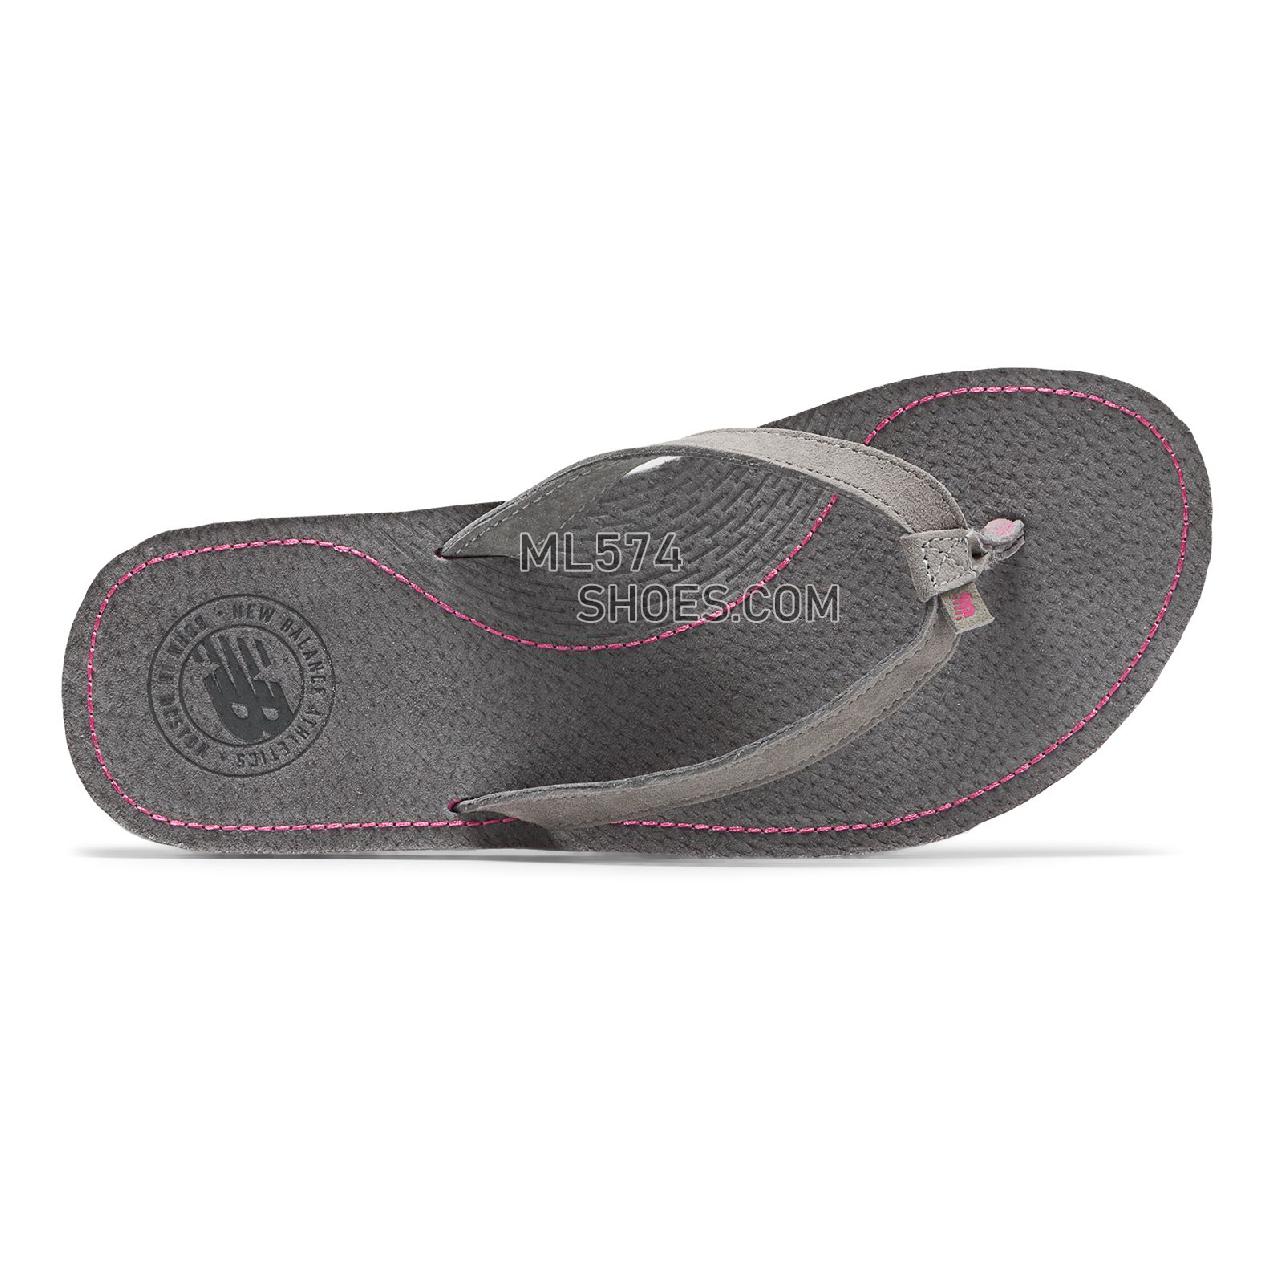 New Balance Classic Thong - Women's 6078 - Sandals Grey with Pink - W6078GRP